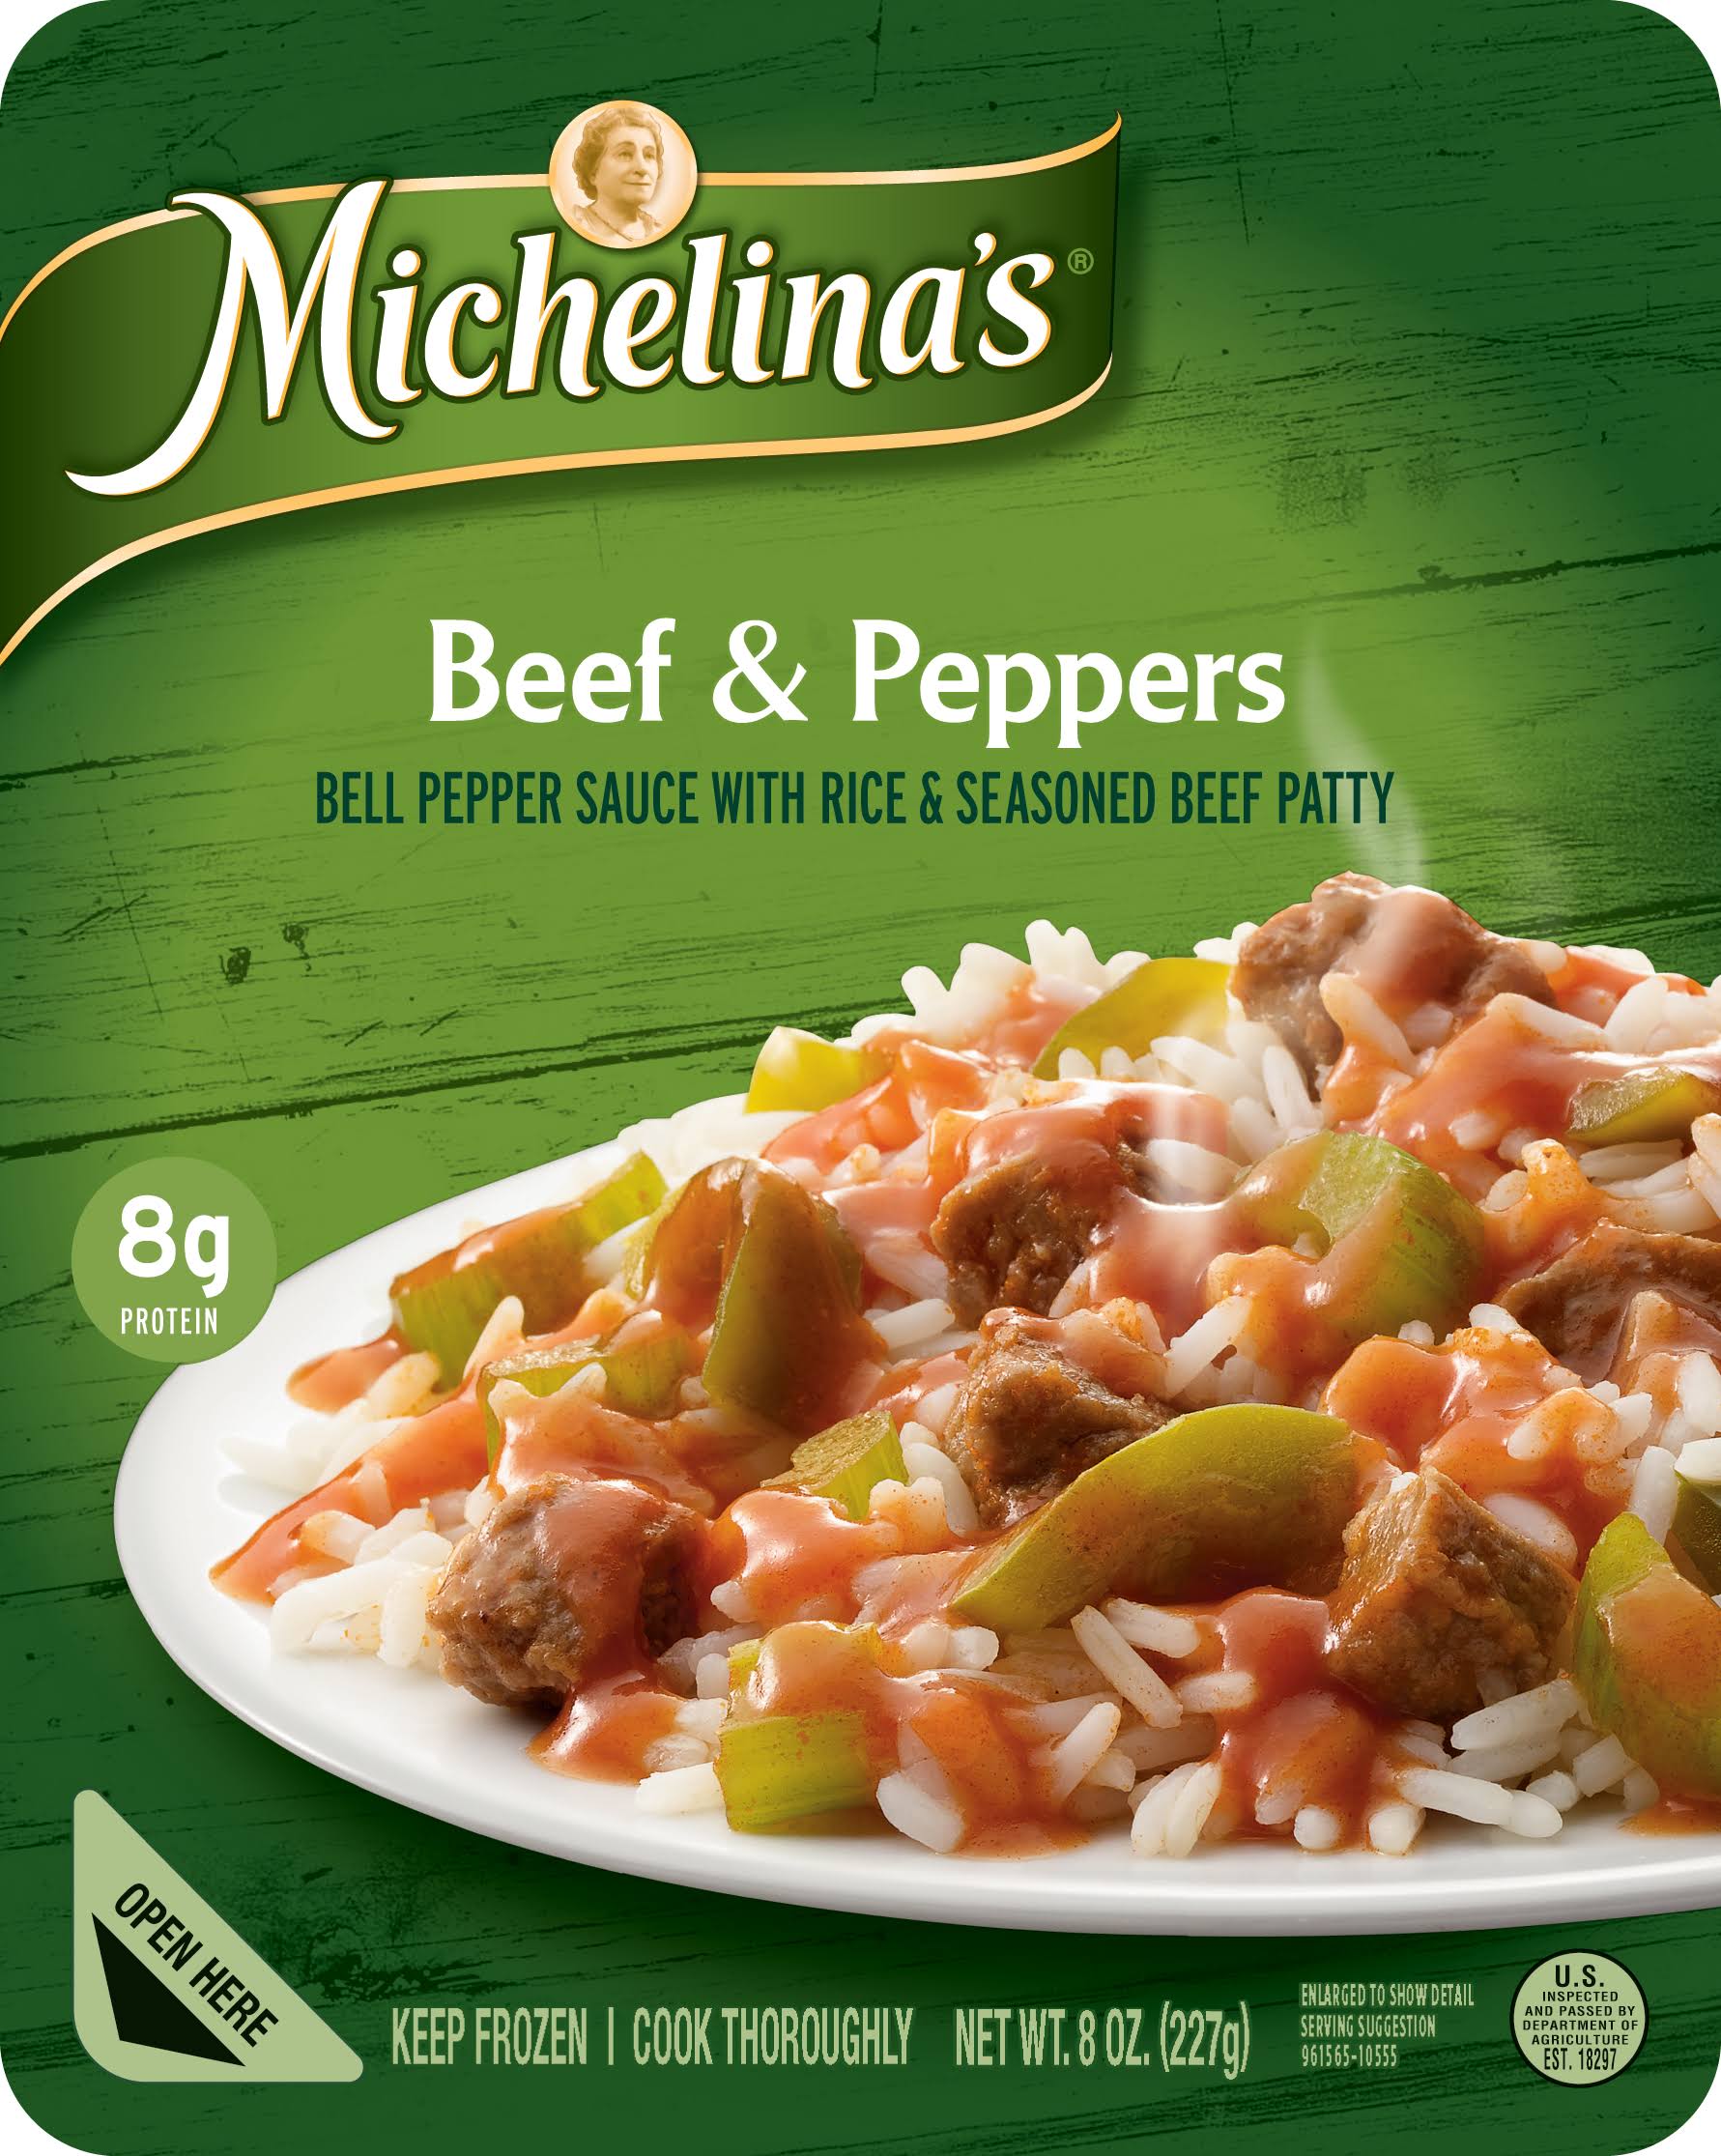 Michelina's Beef & Peppers Meal - 8 oz